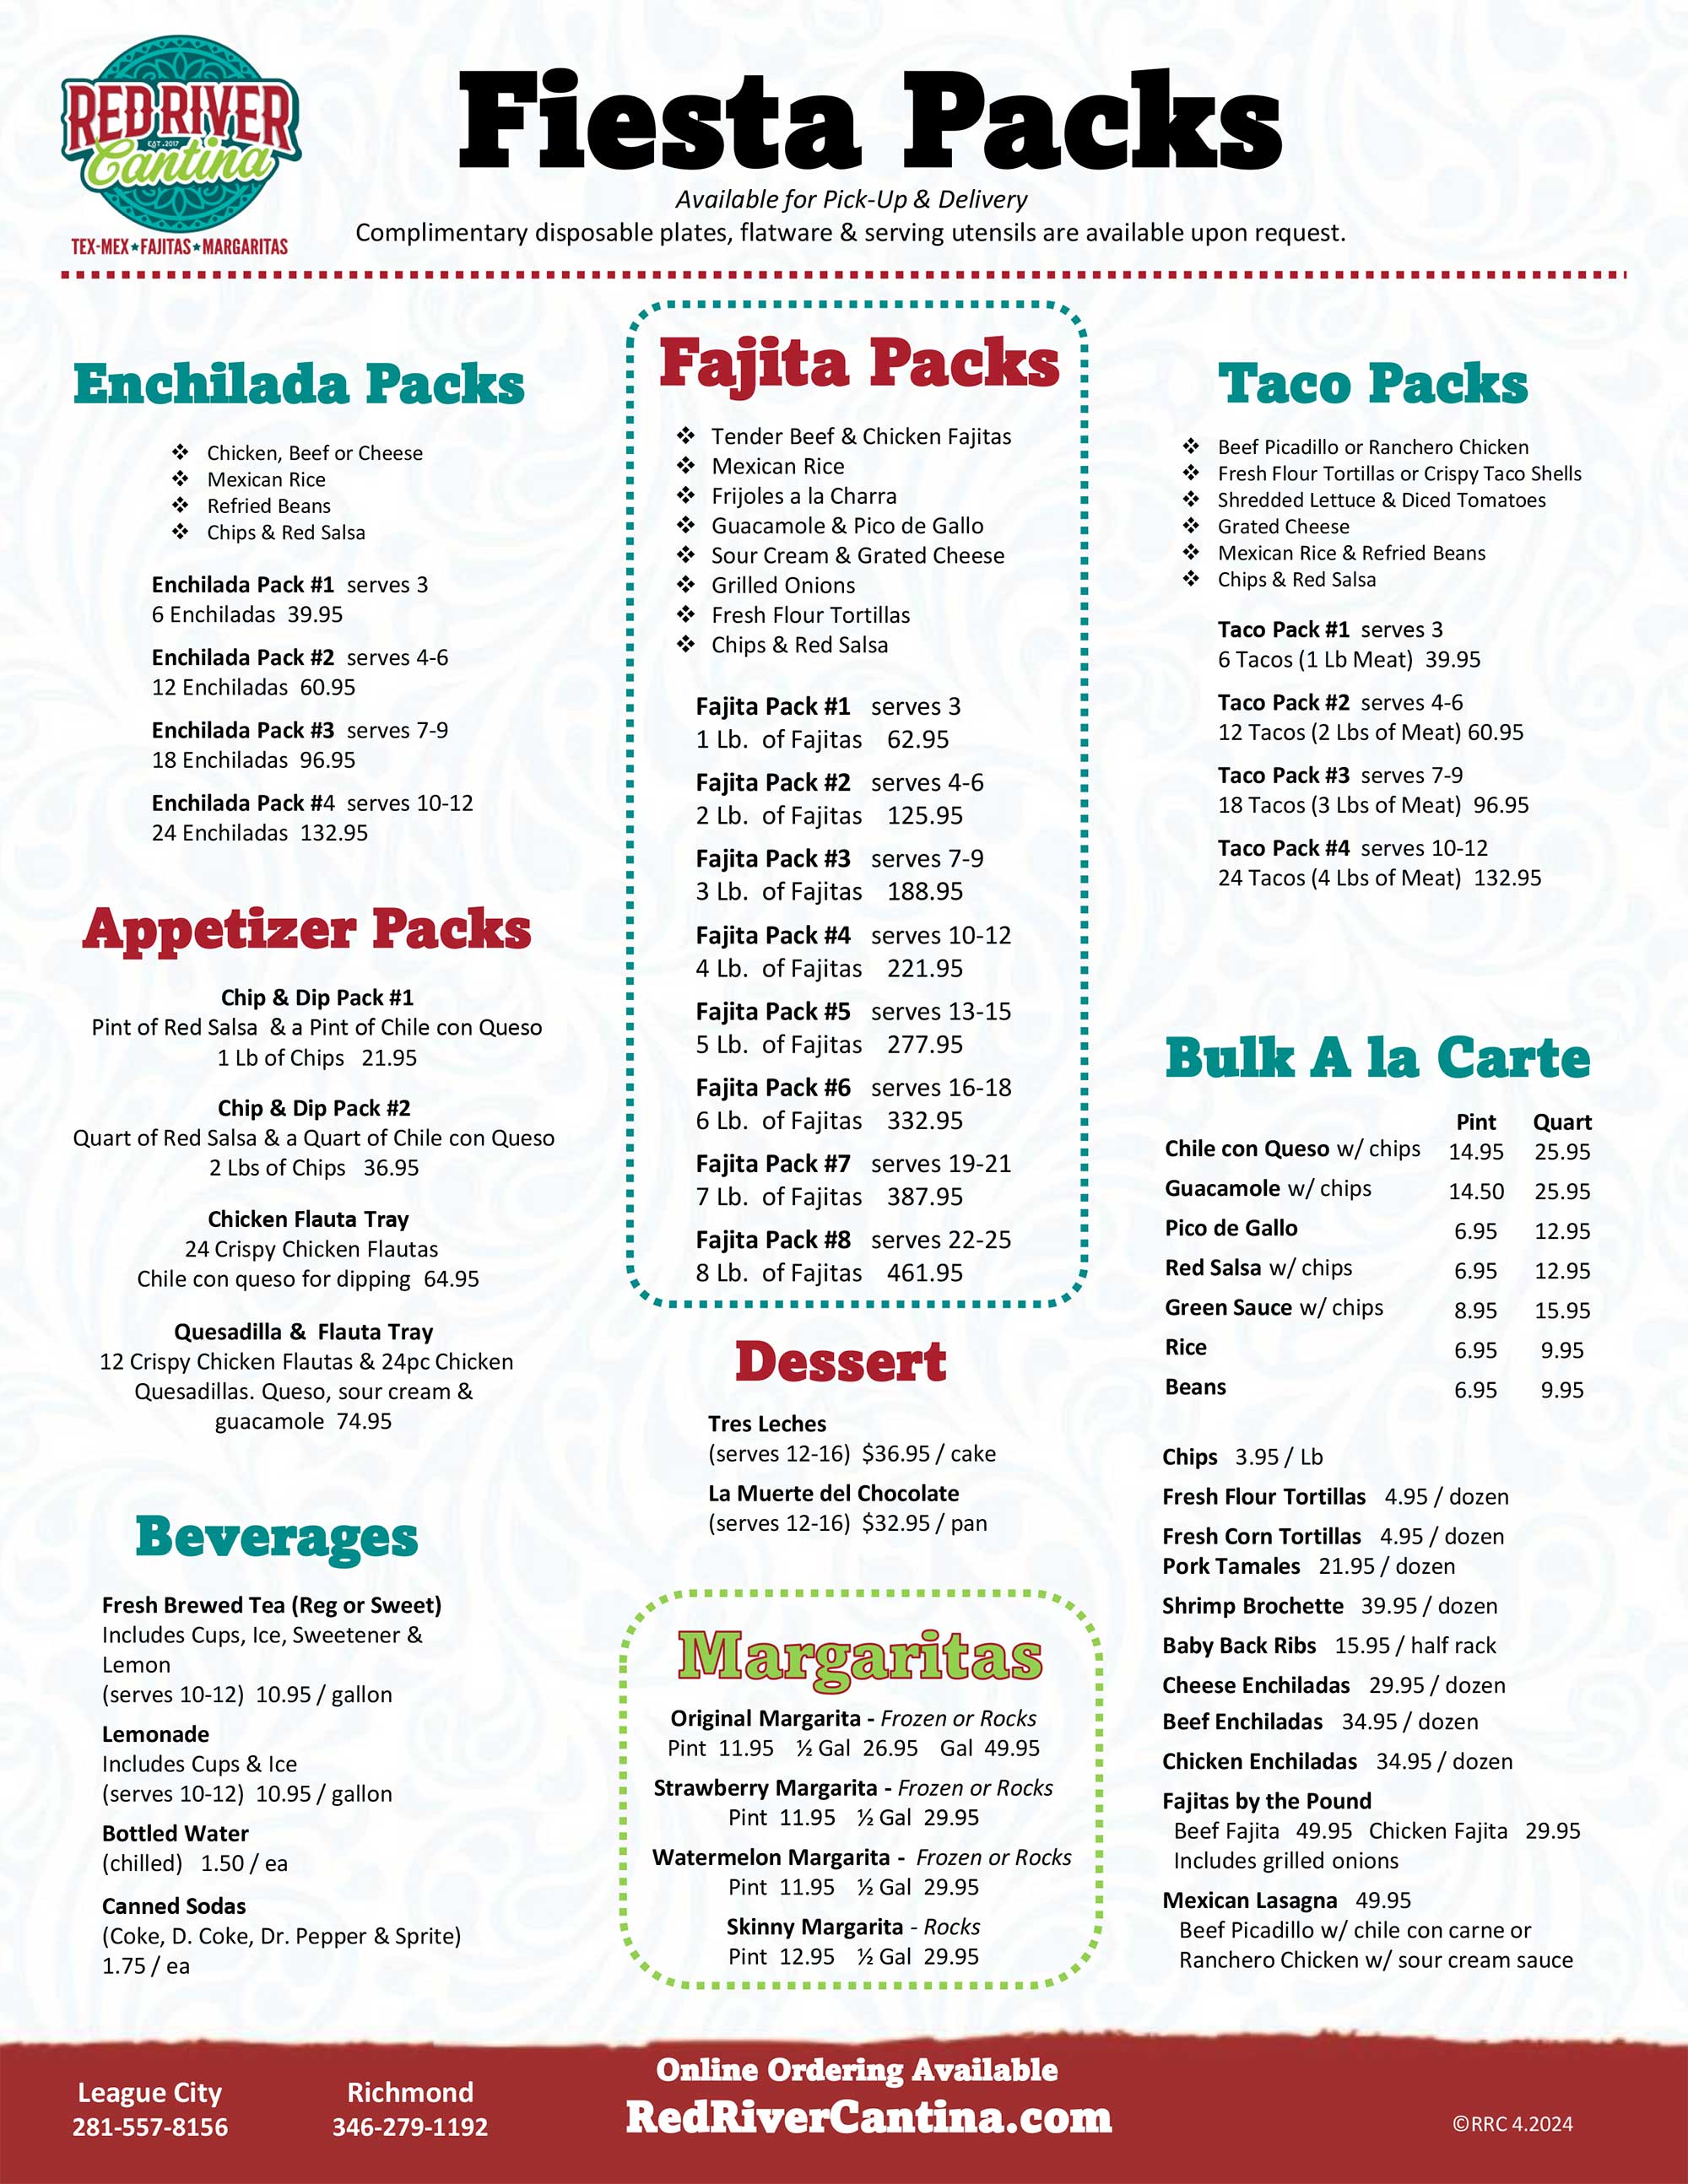 Red River Cantina Catering Menu Page 2